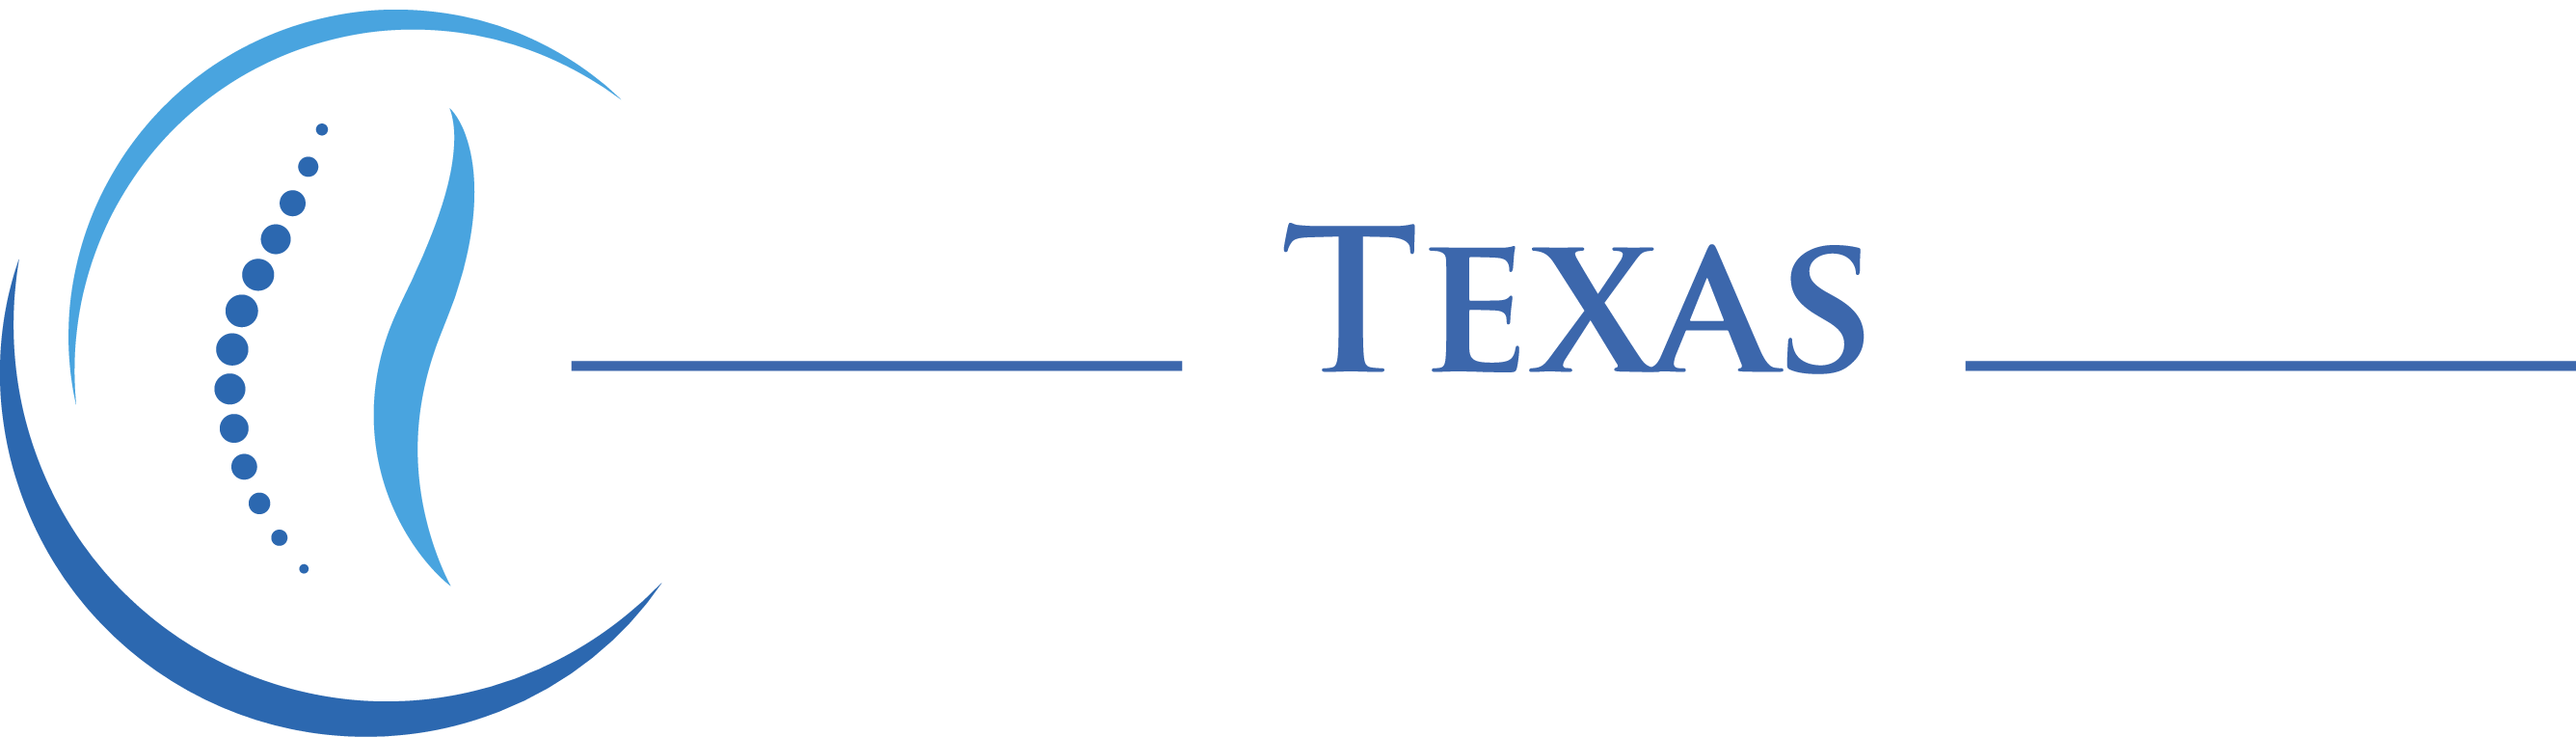 Texas nerve and spine